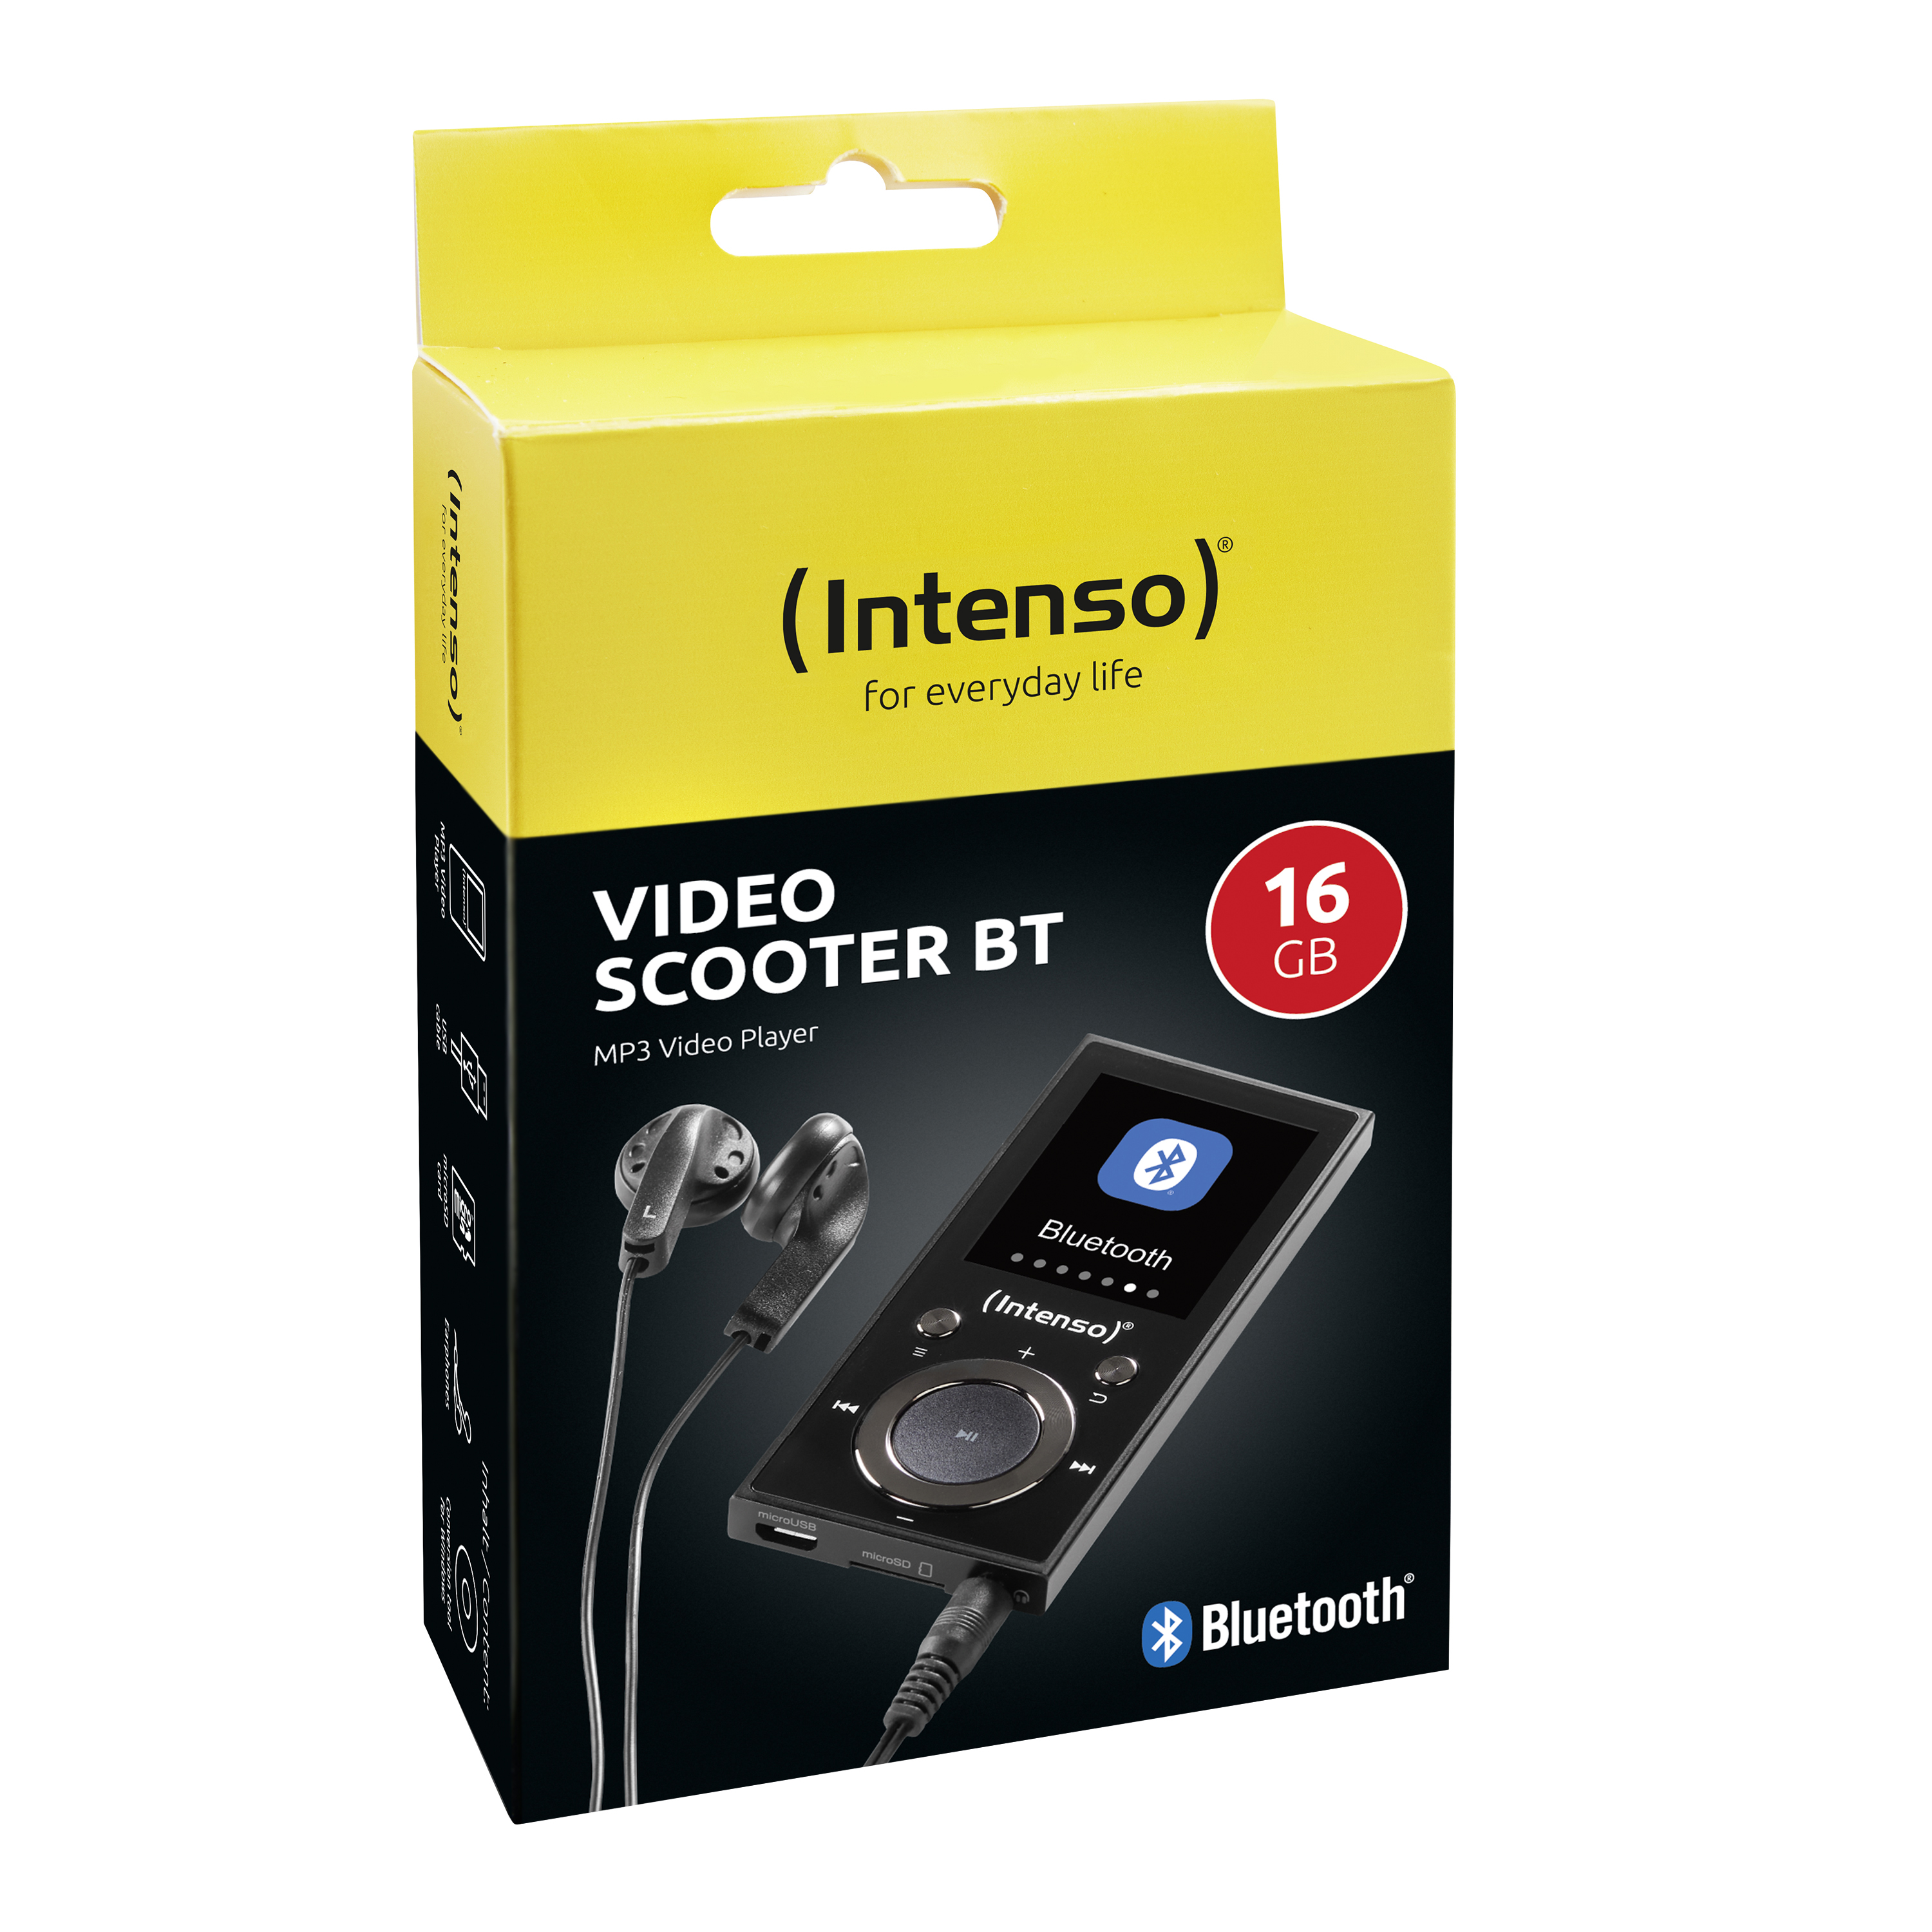 Scooter Player INTENSO Schwarz Video BT 16 GB, MP4 MP4 Player